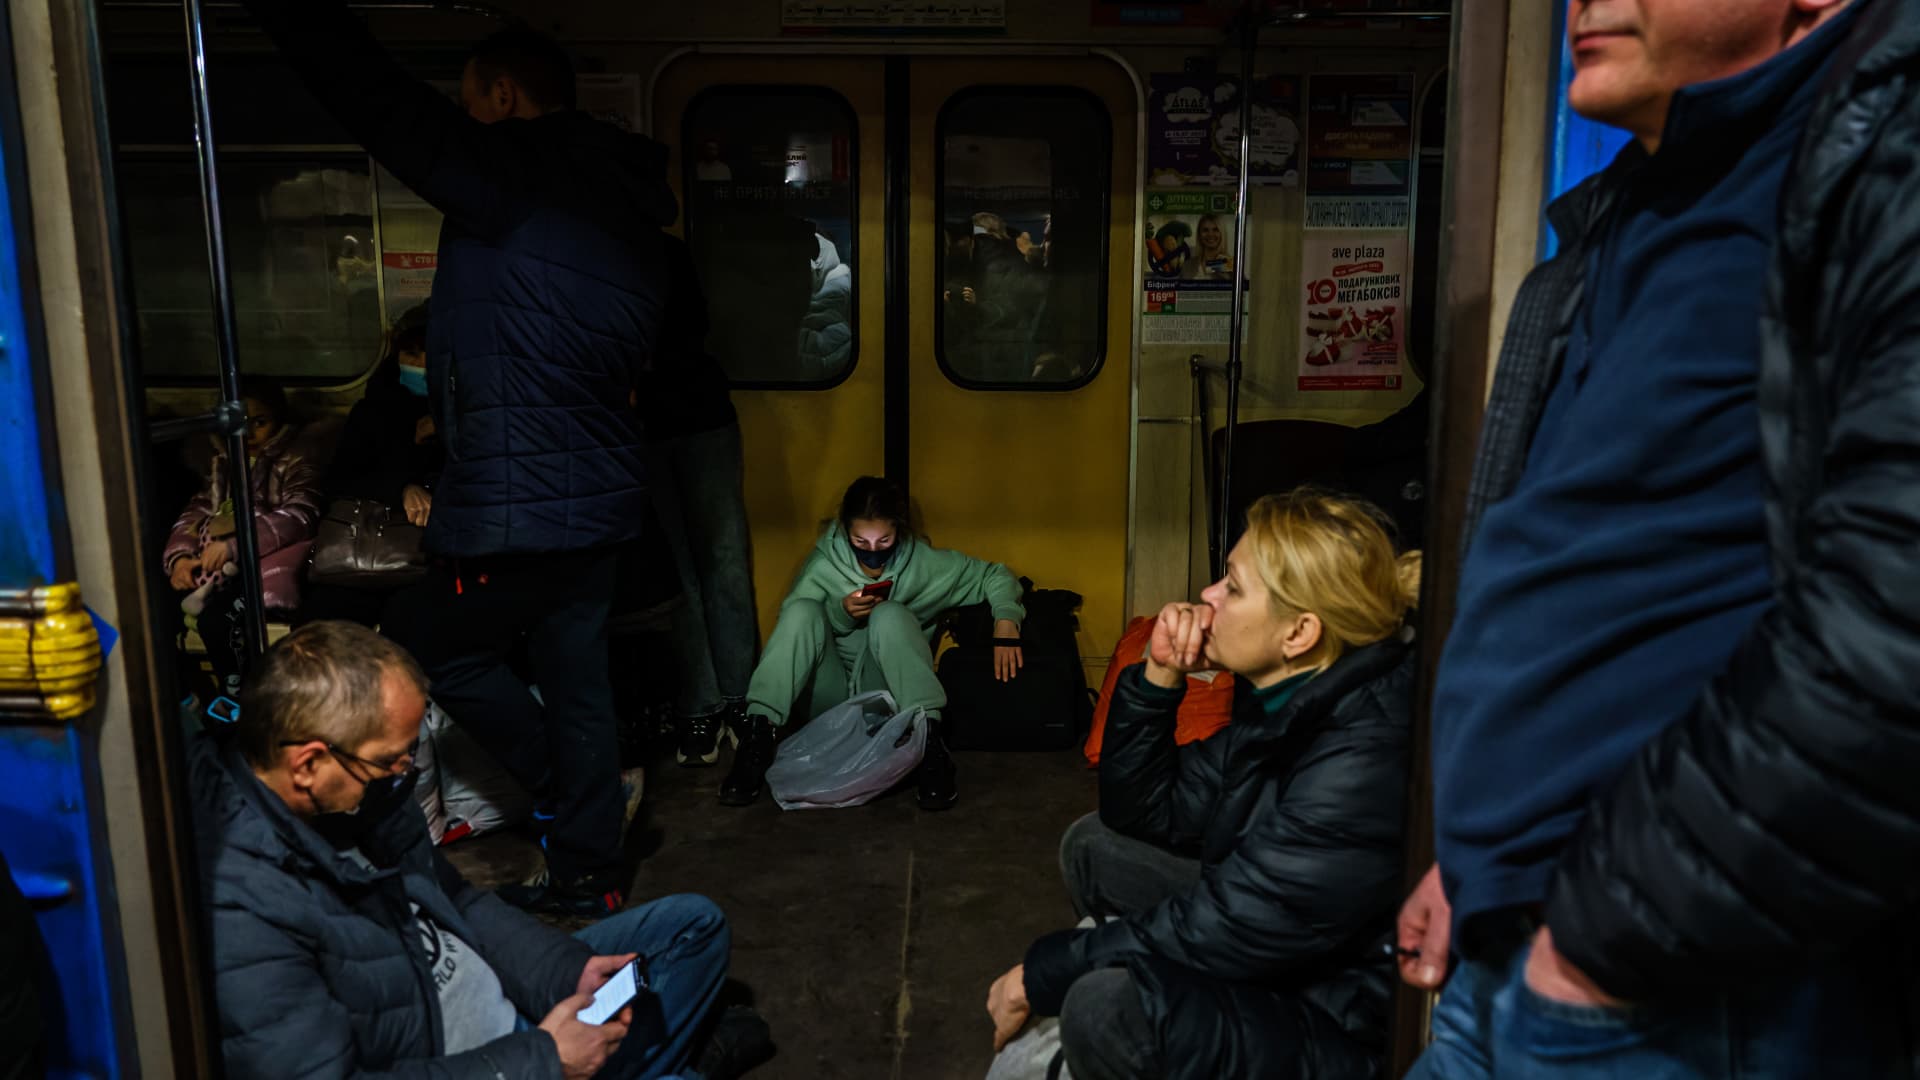 Hundreds of people seek shelter underground, on the platform, inside the dark train cars, and even in the emergency exits, in metro subway station as the Russian invasion of Ukraine continues, in Kharkiv, Ukraine, Thursday, Feb. 24, 2022.